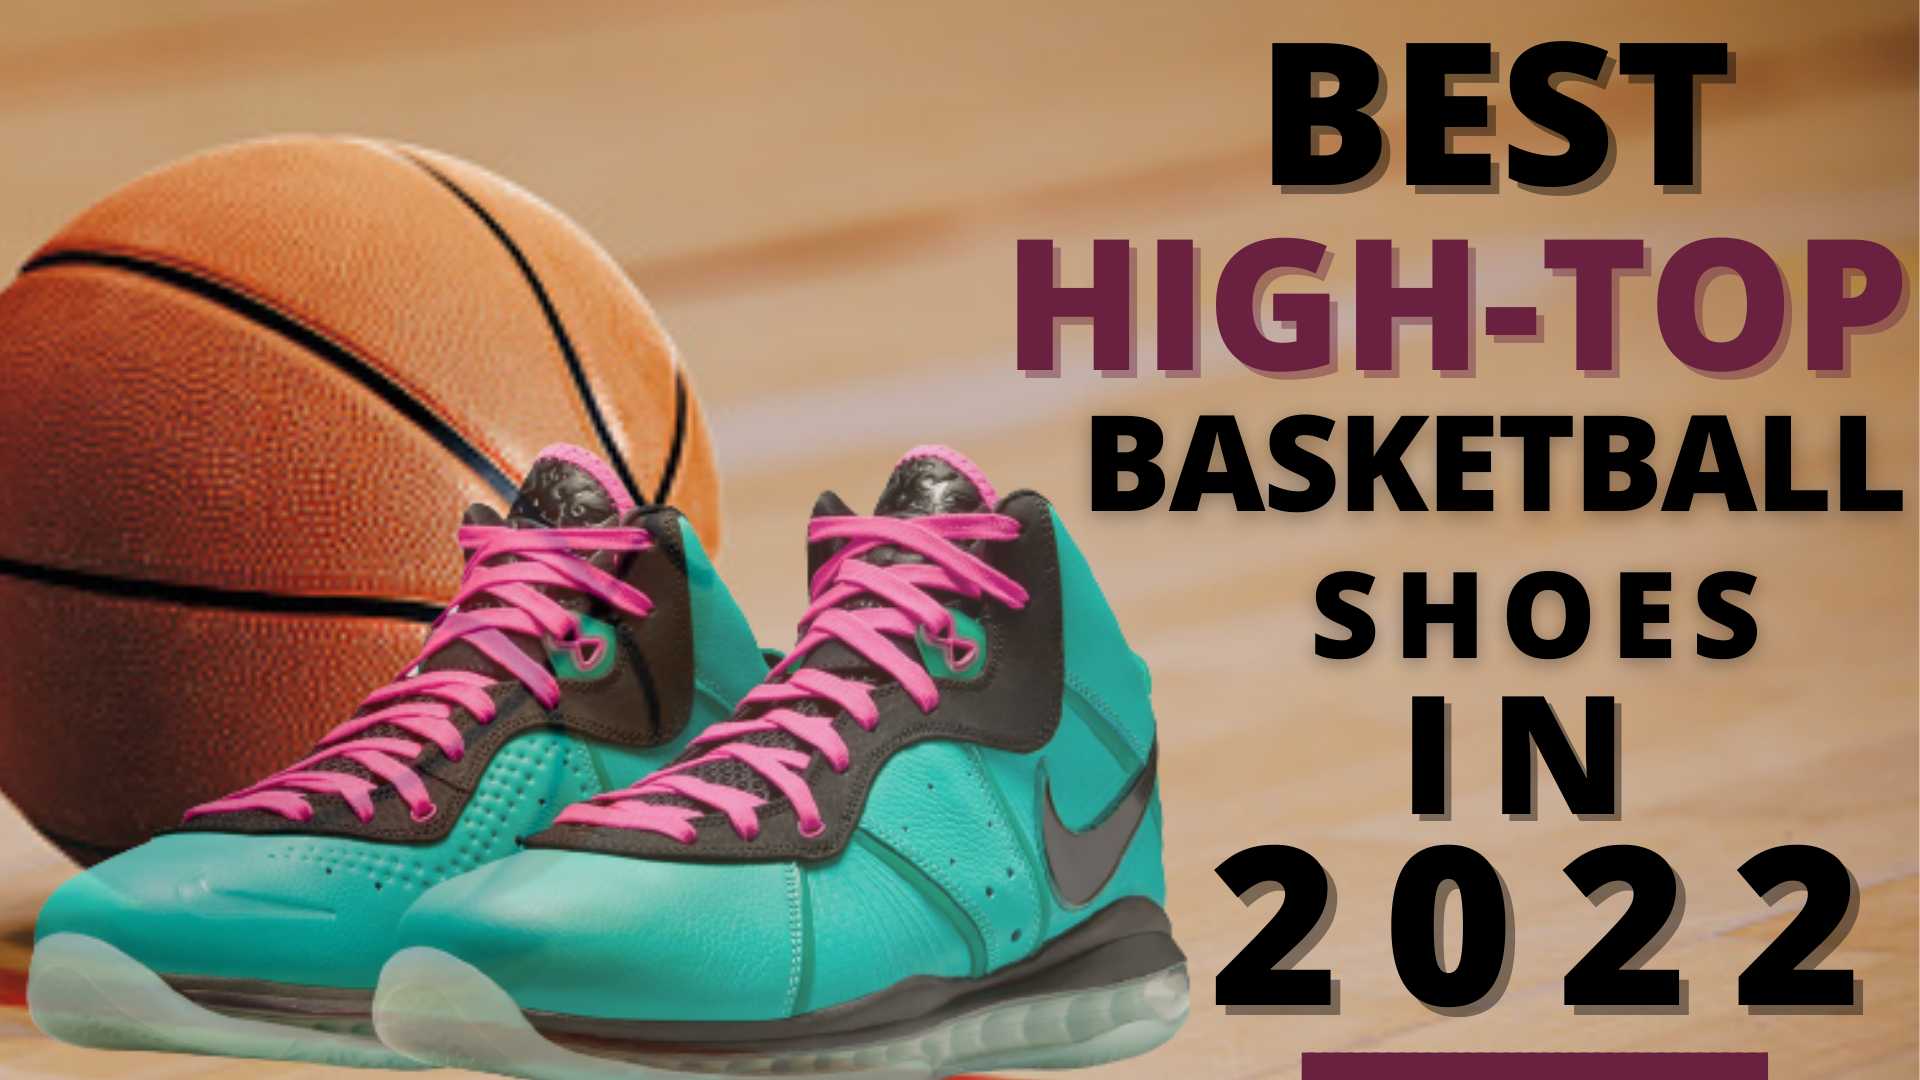 Best High Top Basketball Shoes & Sneakers For Men & Women